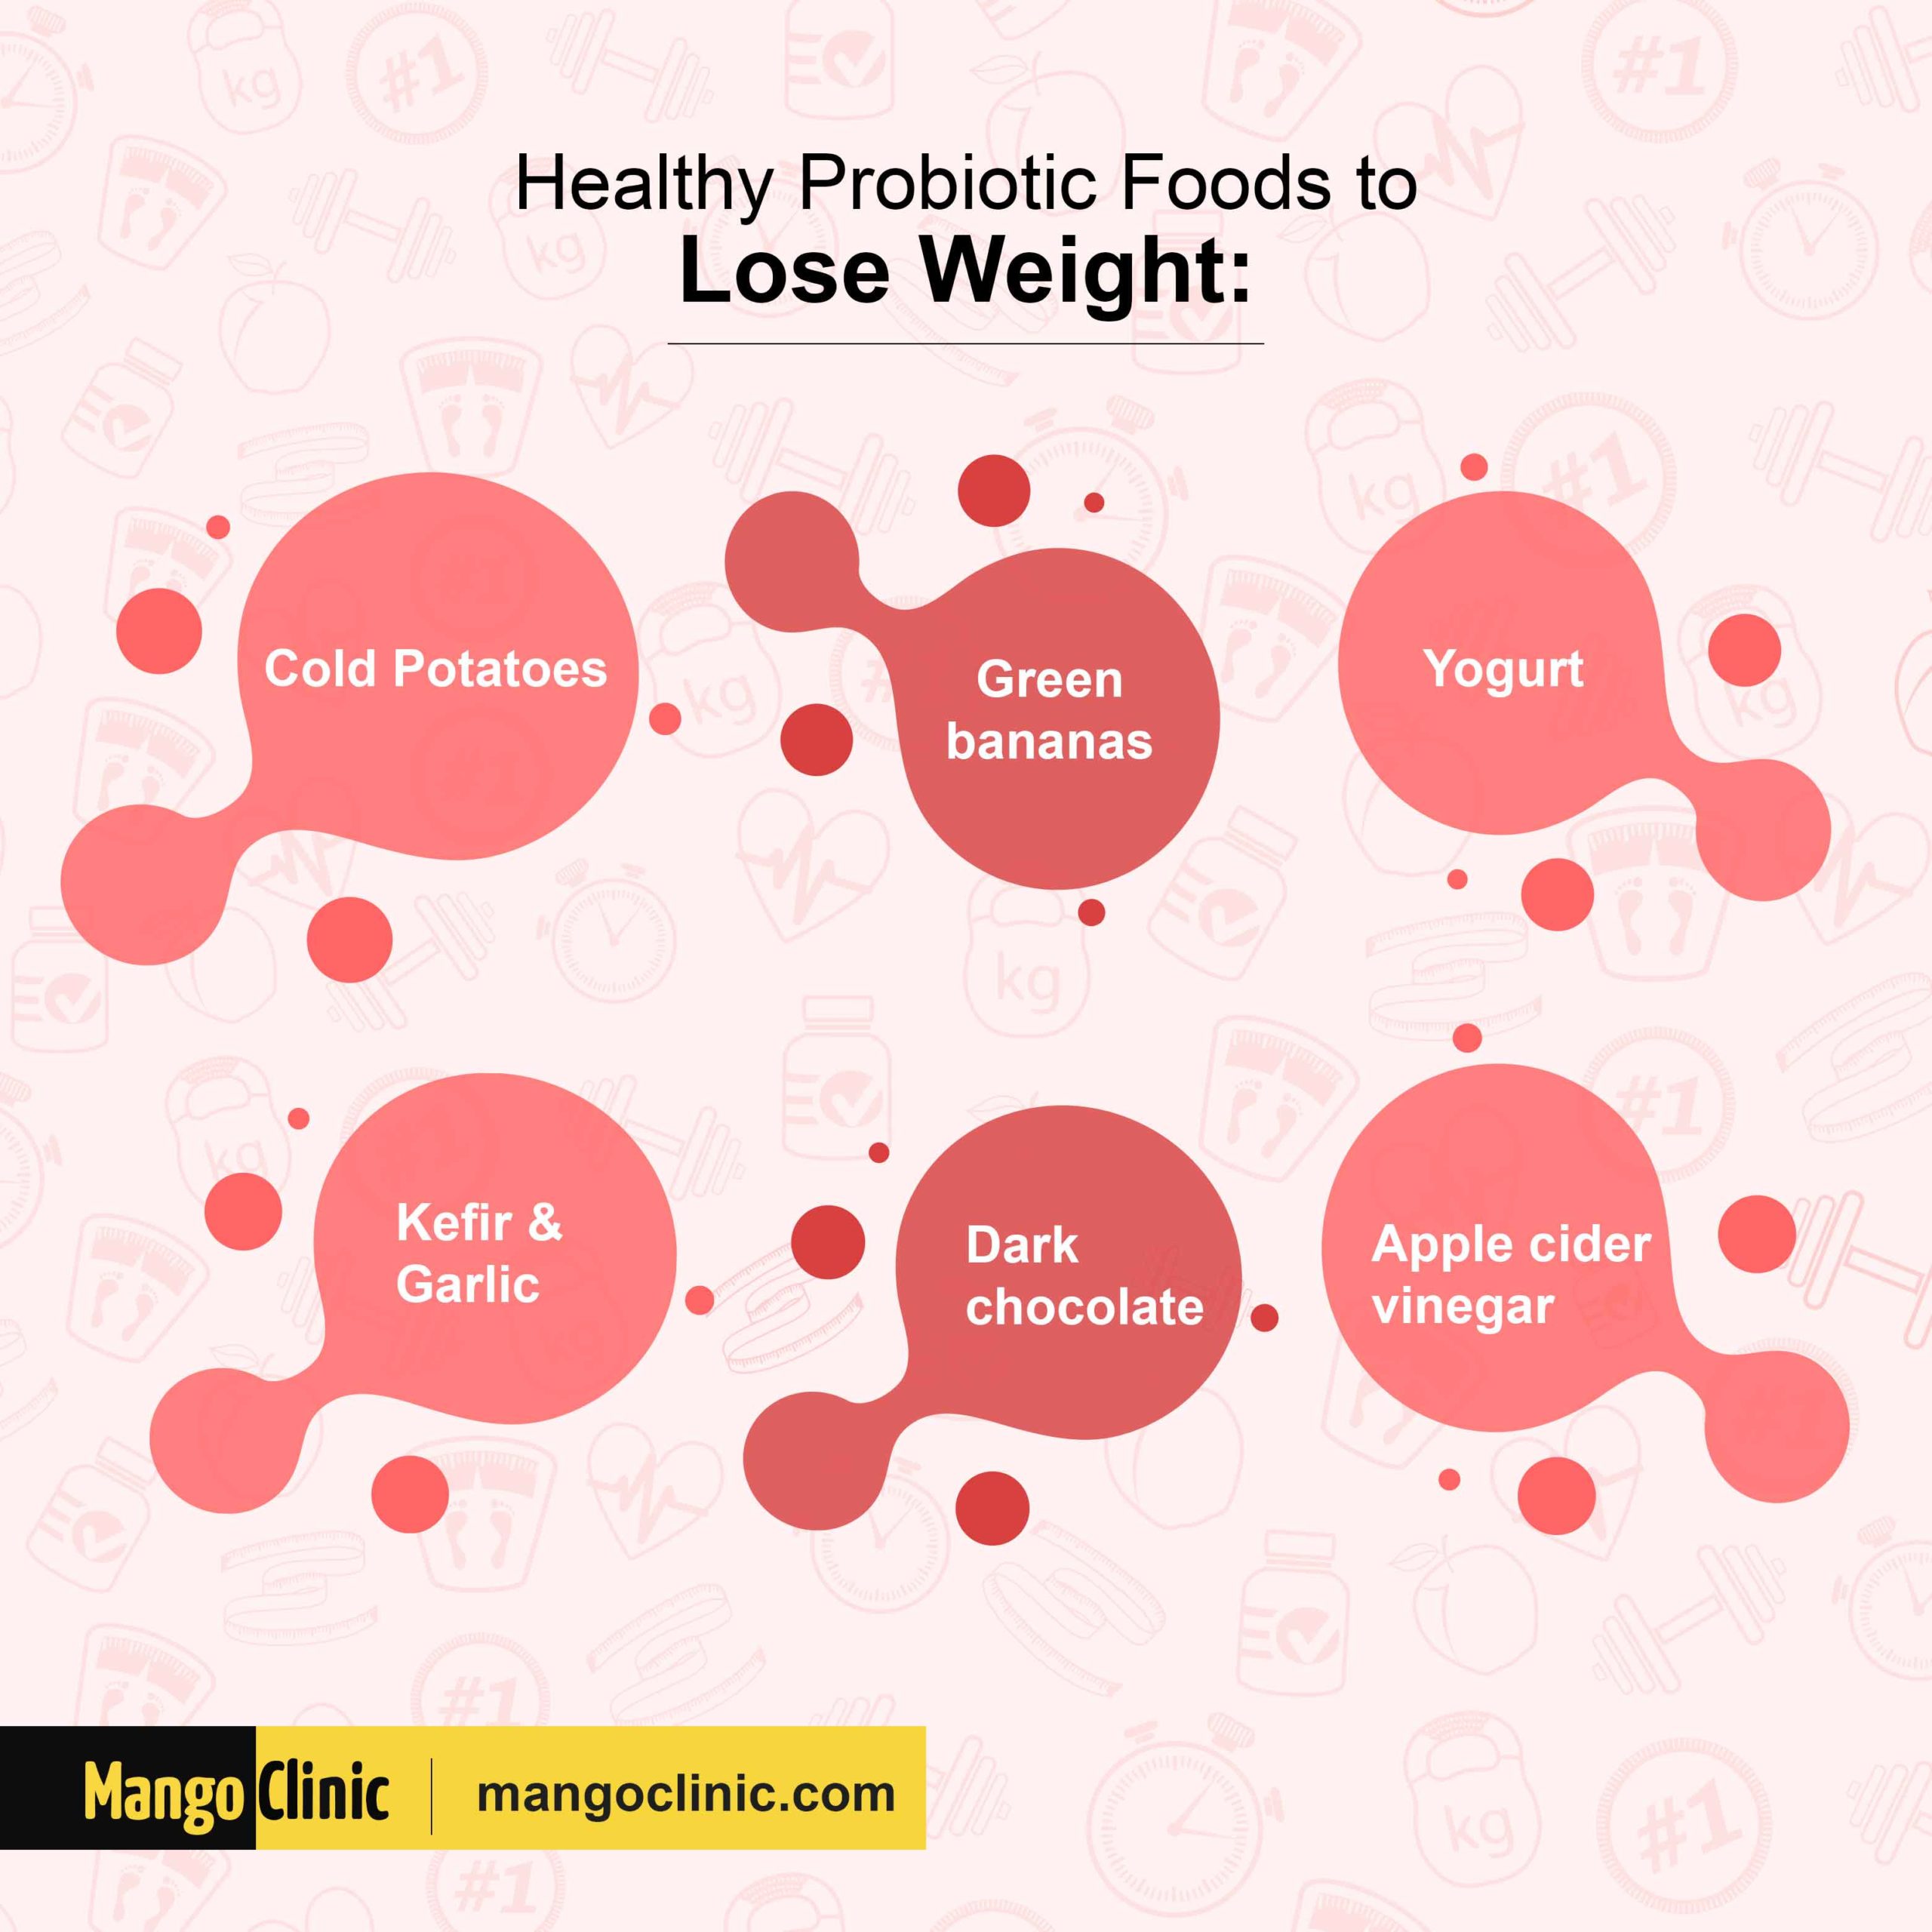 Probiotic food to lose weight